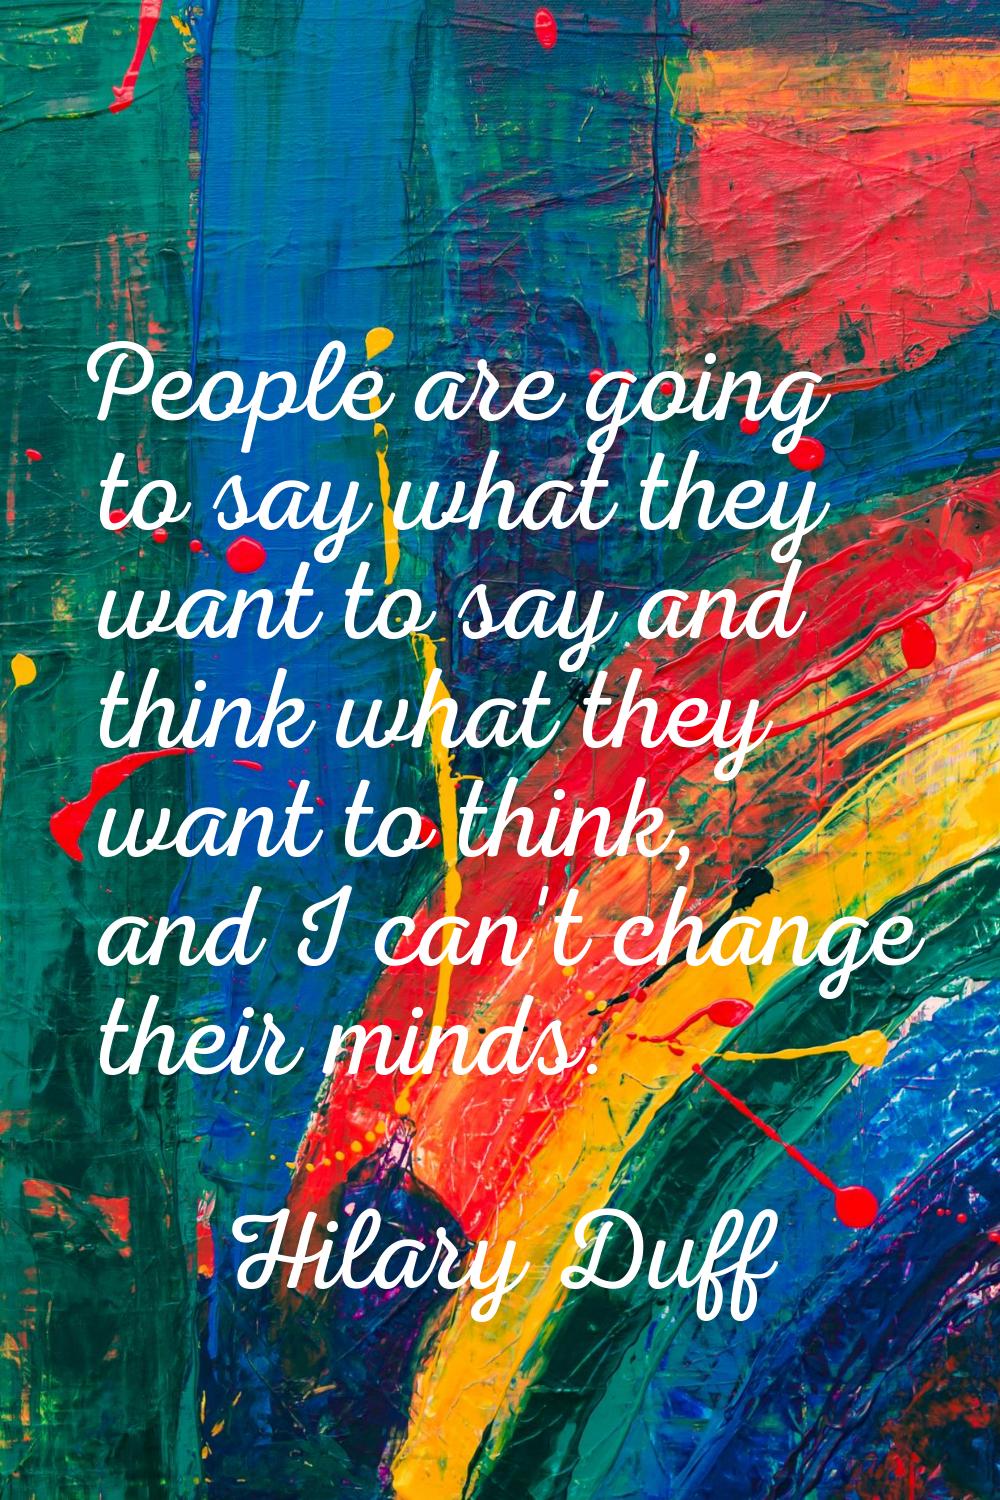 People are going to say what they want to say and think what they want to think, and I can't change